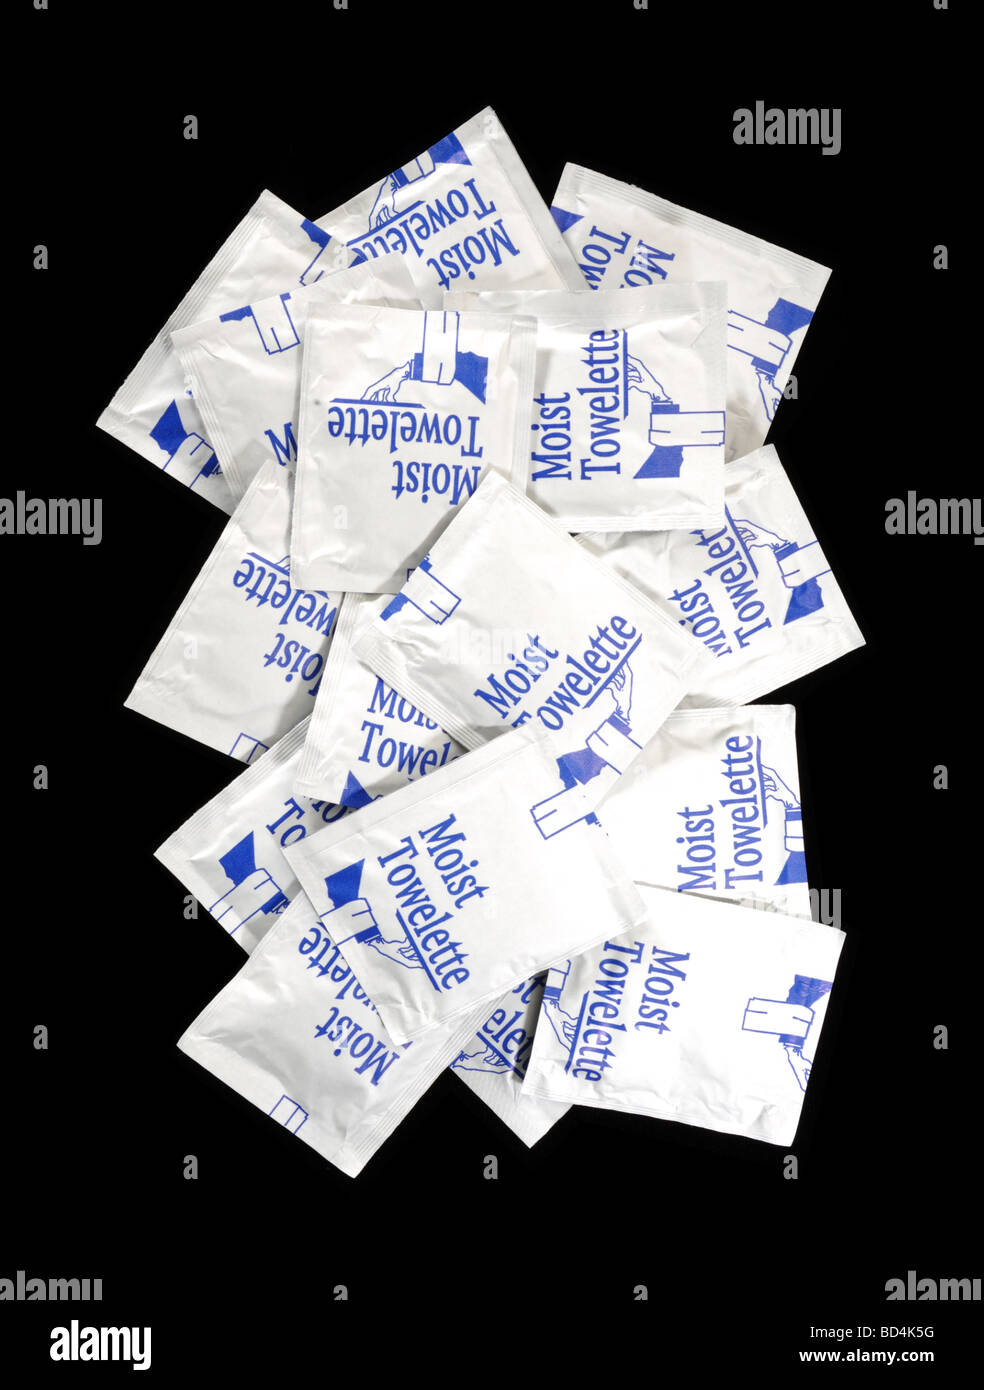 A collection of small moist towelettes Stock Photo